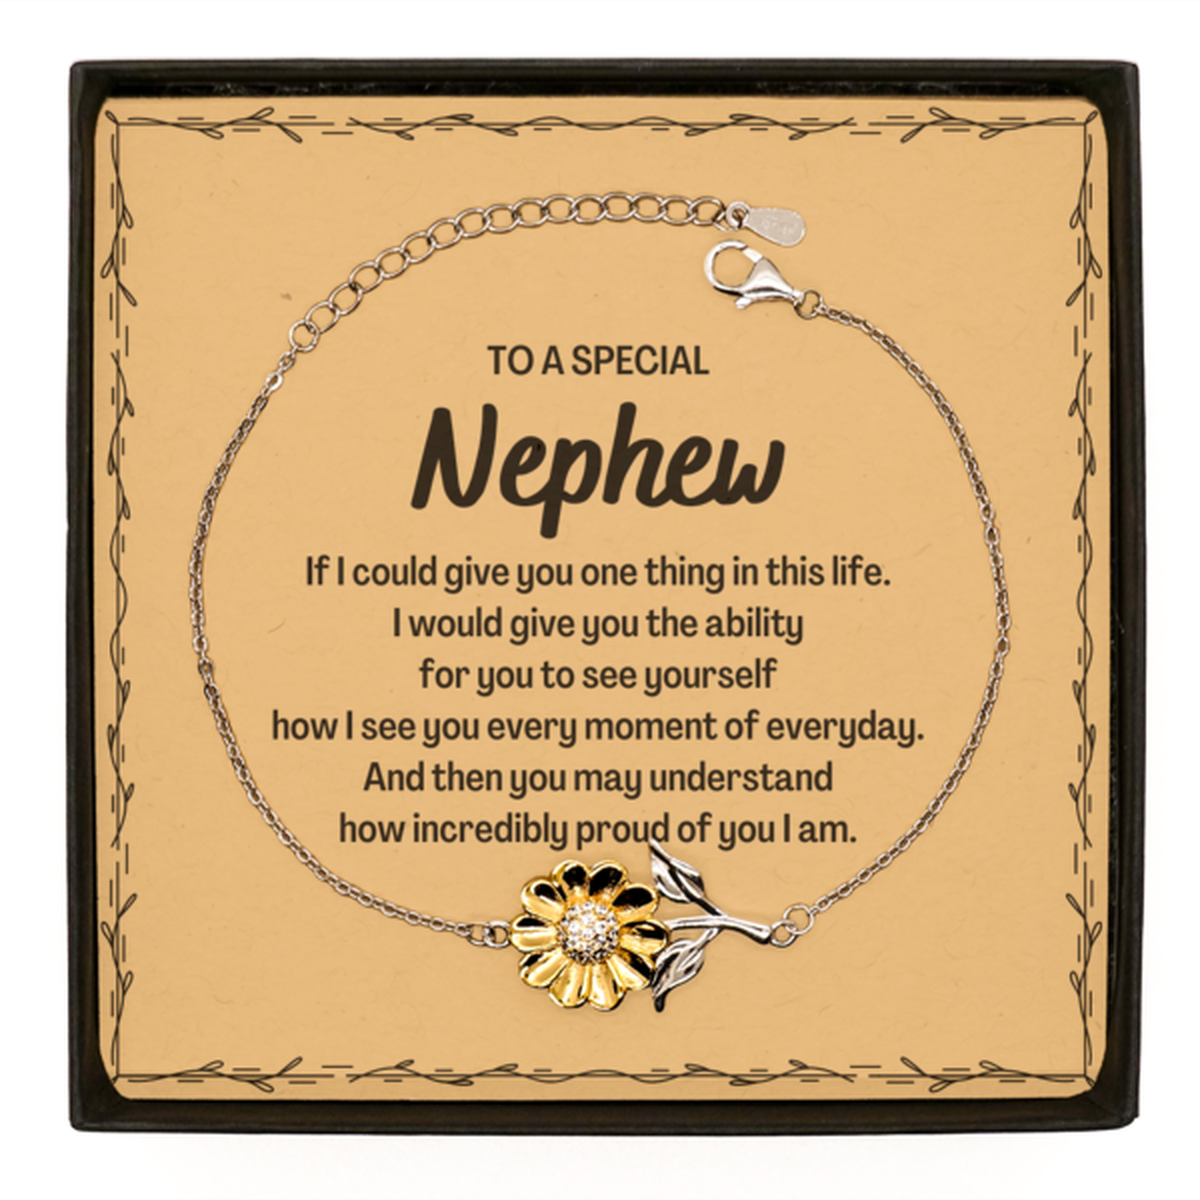 To My Nephew Sunflower Bracelet, Gifts For Nephew Message Card, Inspirational Gifts for Christmas Birthday, Epic Gifts for Nephew To A Special Nephew how incredibly proud of you I am